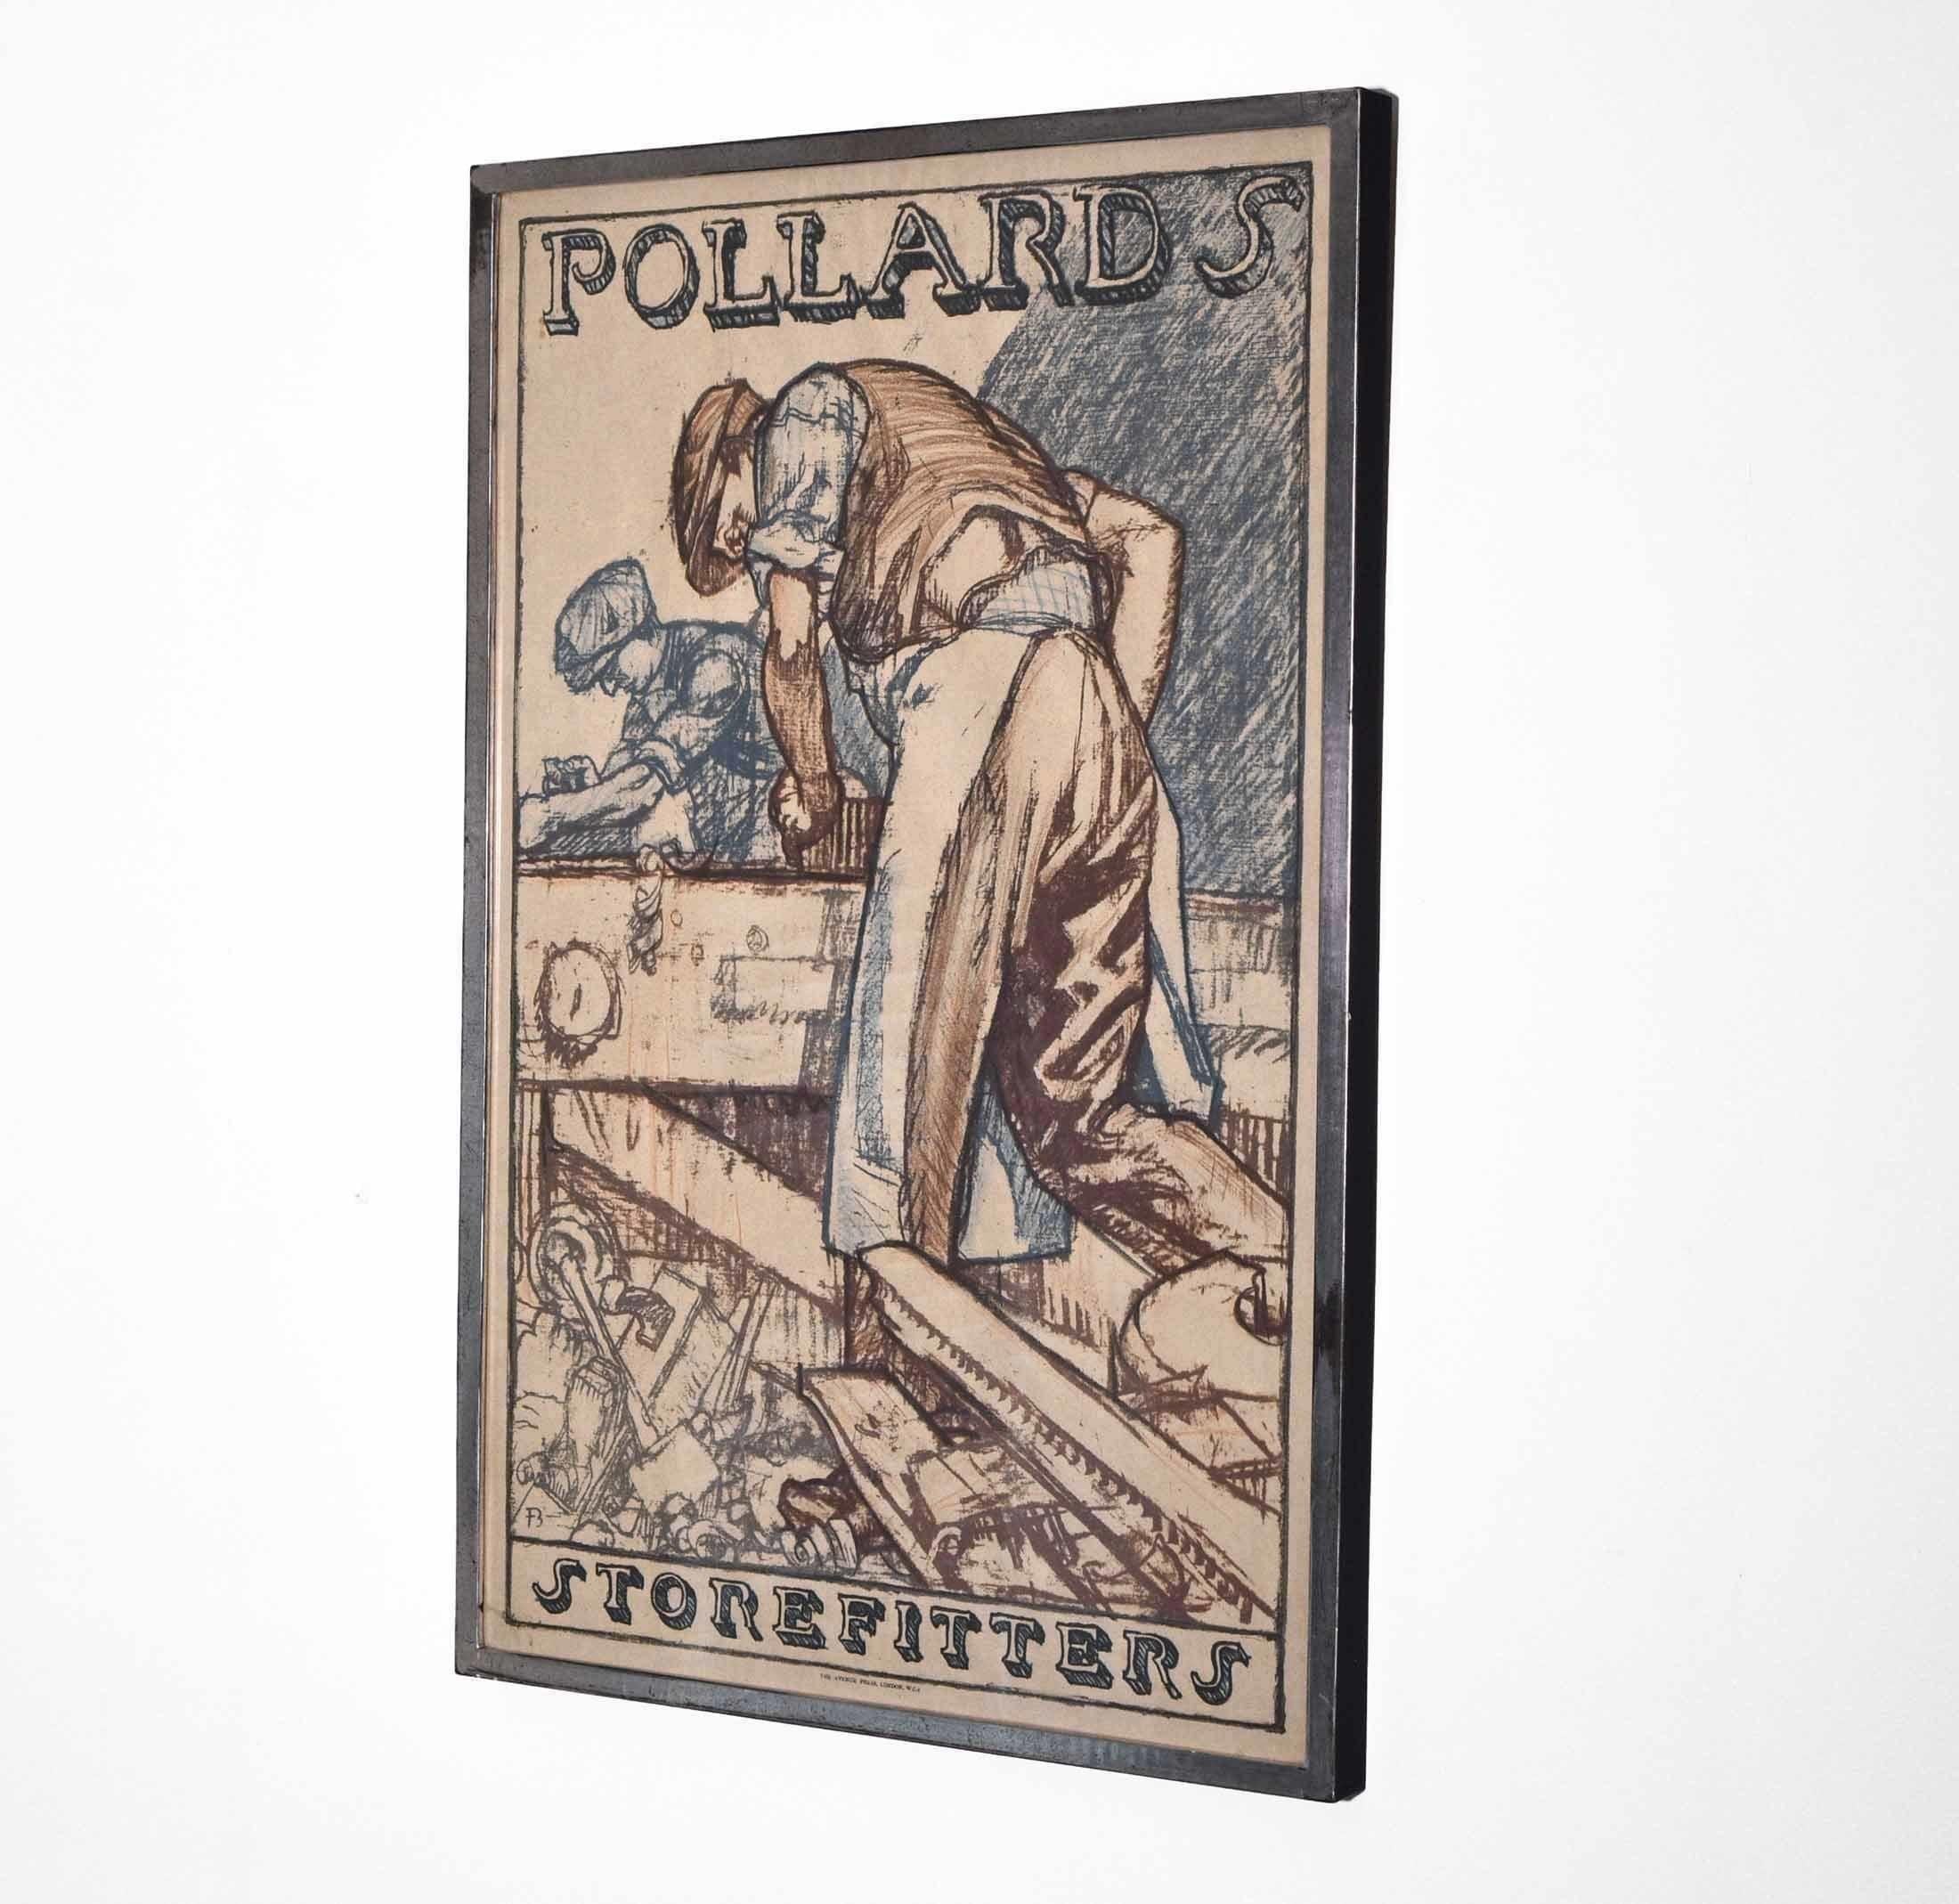 A colour lithographic framed poster, printed by the Avenue Press, London and designed by Sir Frank Brangwyn (1867-1956) for Pollards Storefitters. Circa 1930.

Printed initials in the bottom left. The poster is framed in a later ebonised and